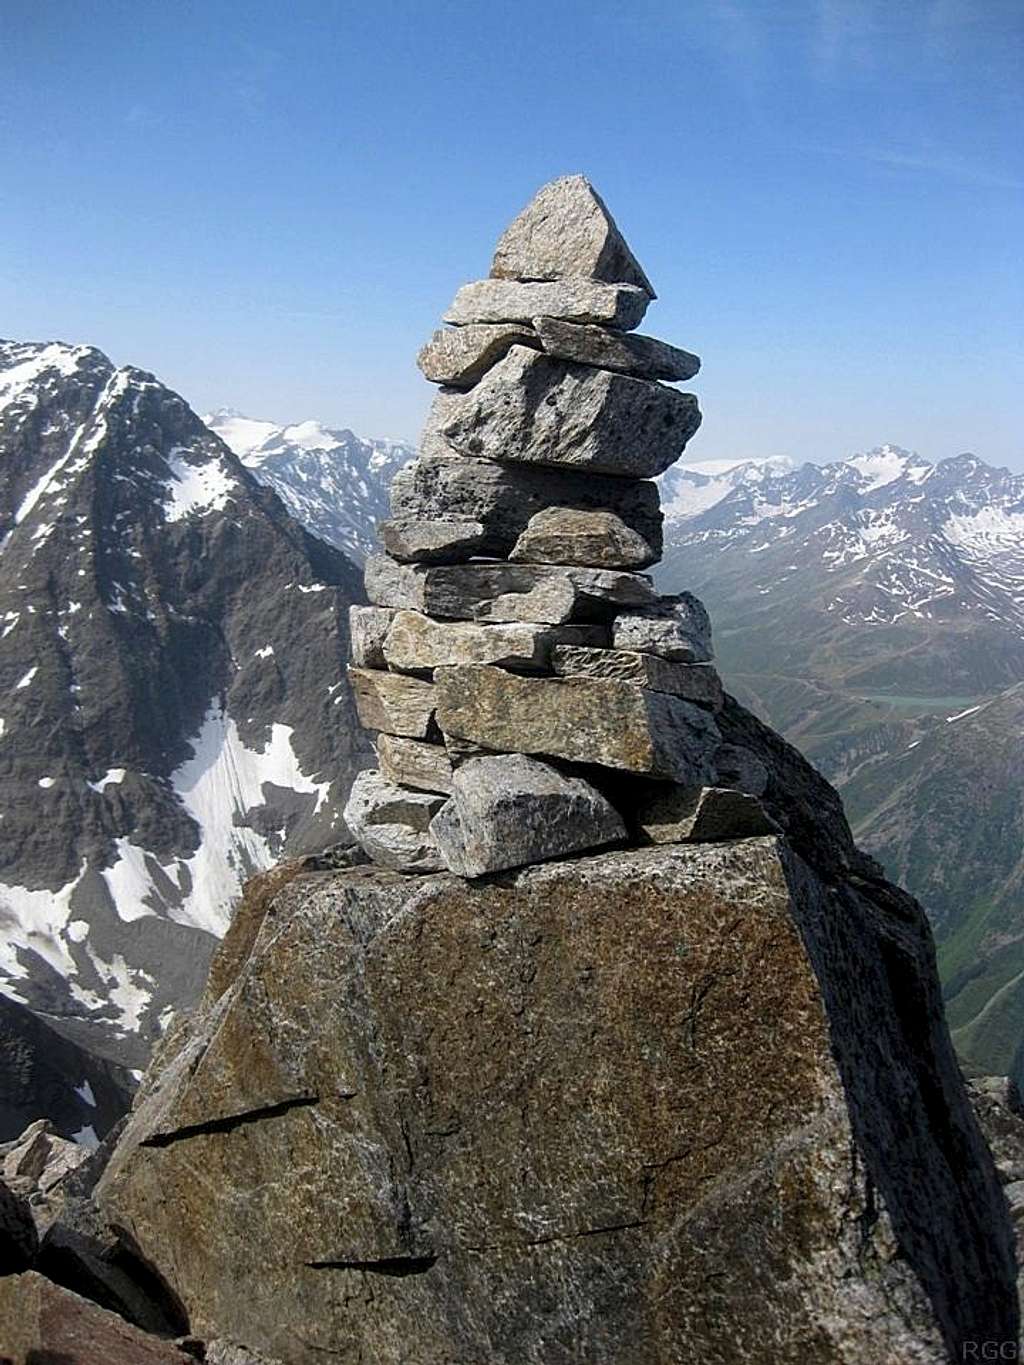 Big cairn on the Hohe Geige west ridge, about half way between Rüsselsheimer Hütte and the summit